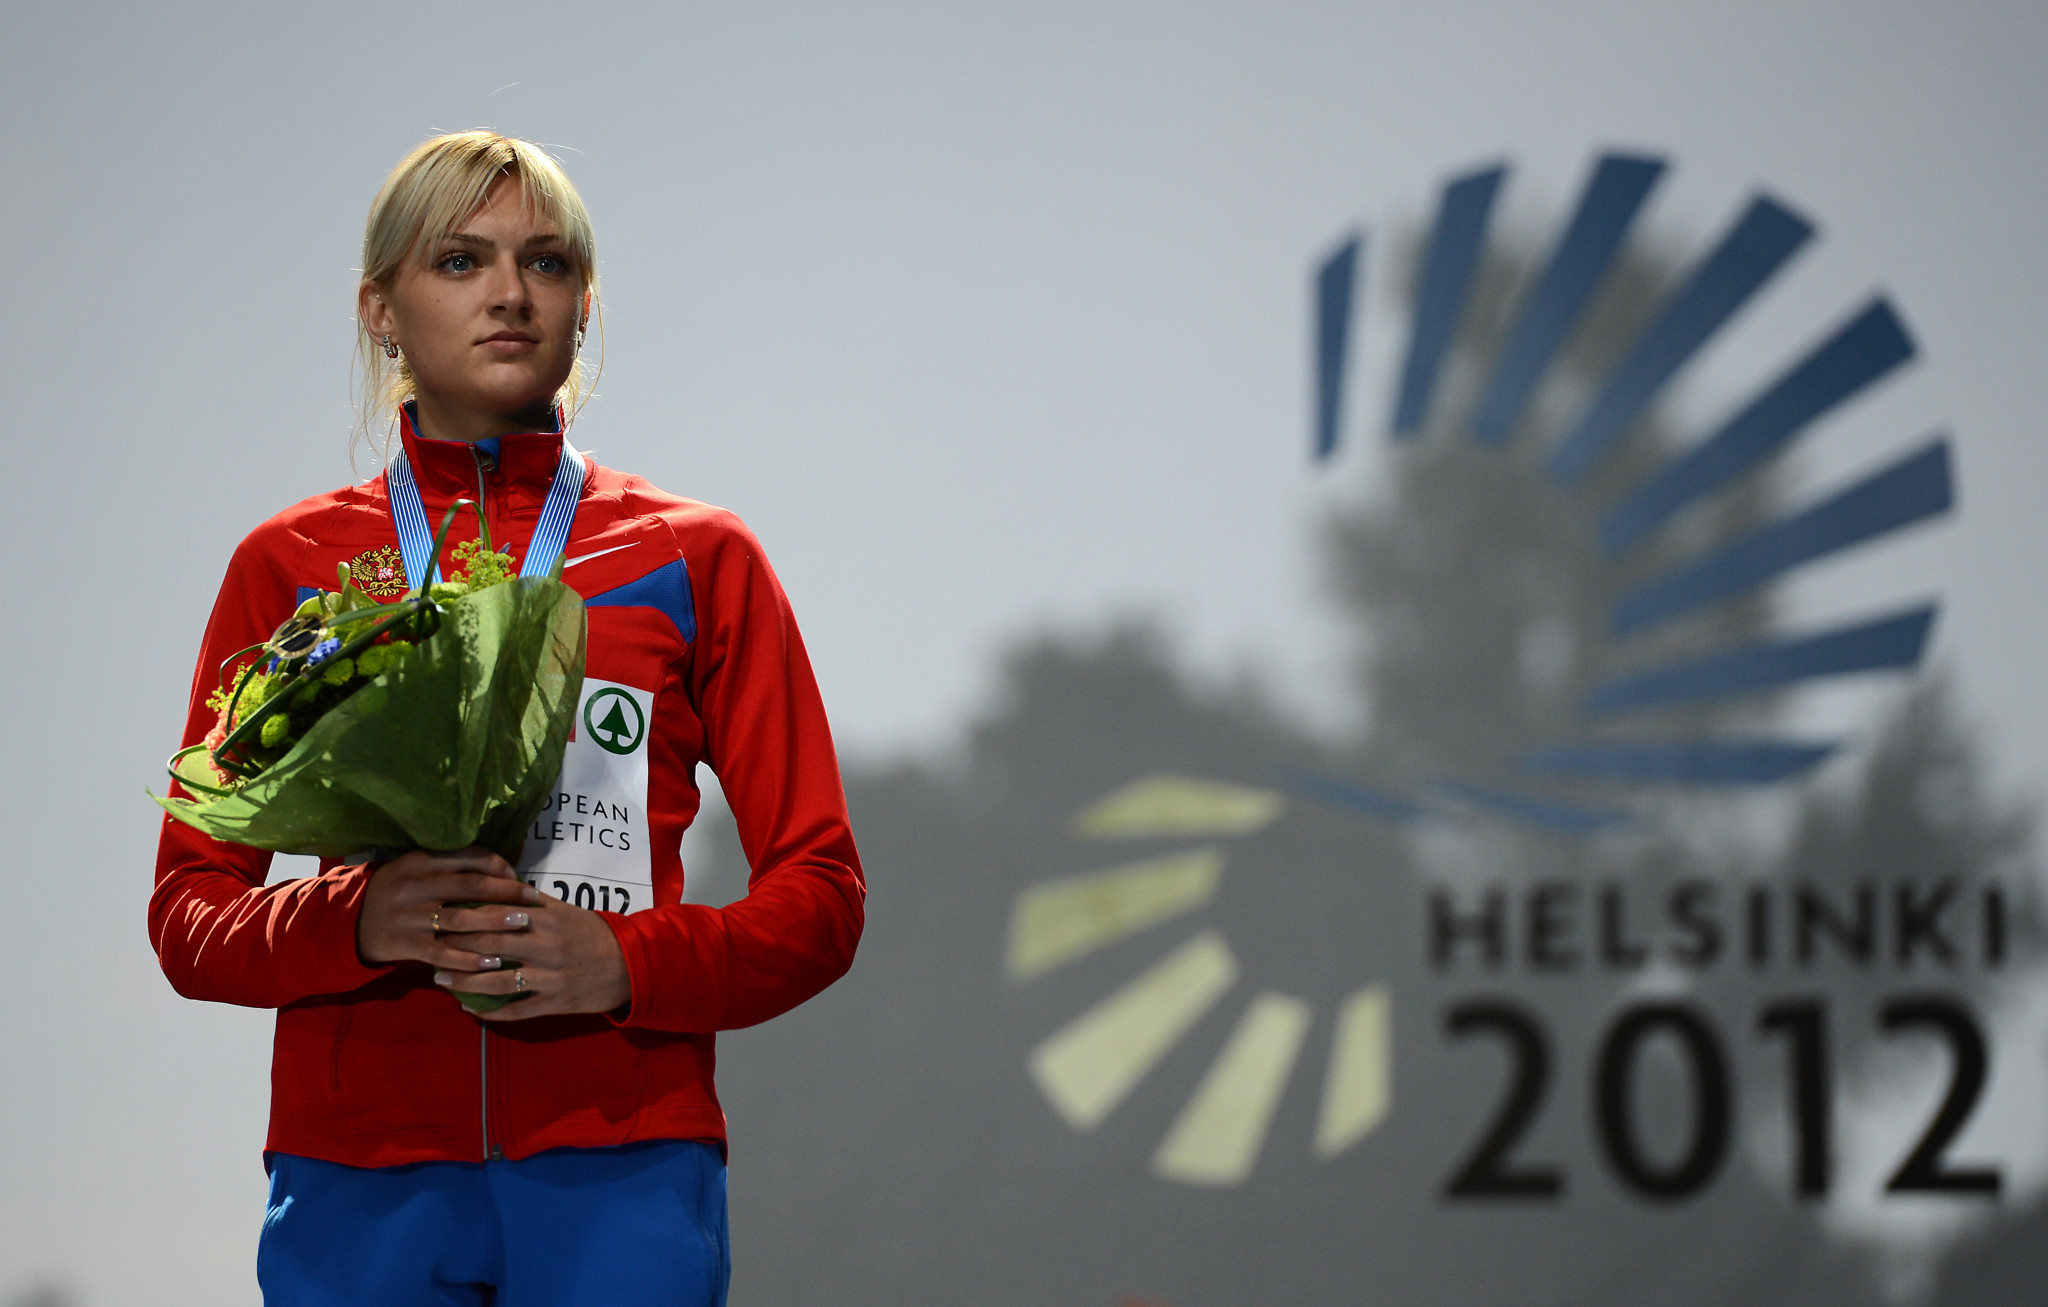 Russian to lose 2012 European Championships 400m hurdles gold medal for doping